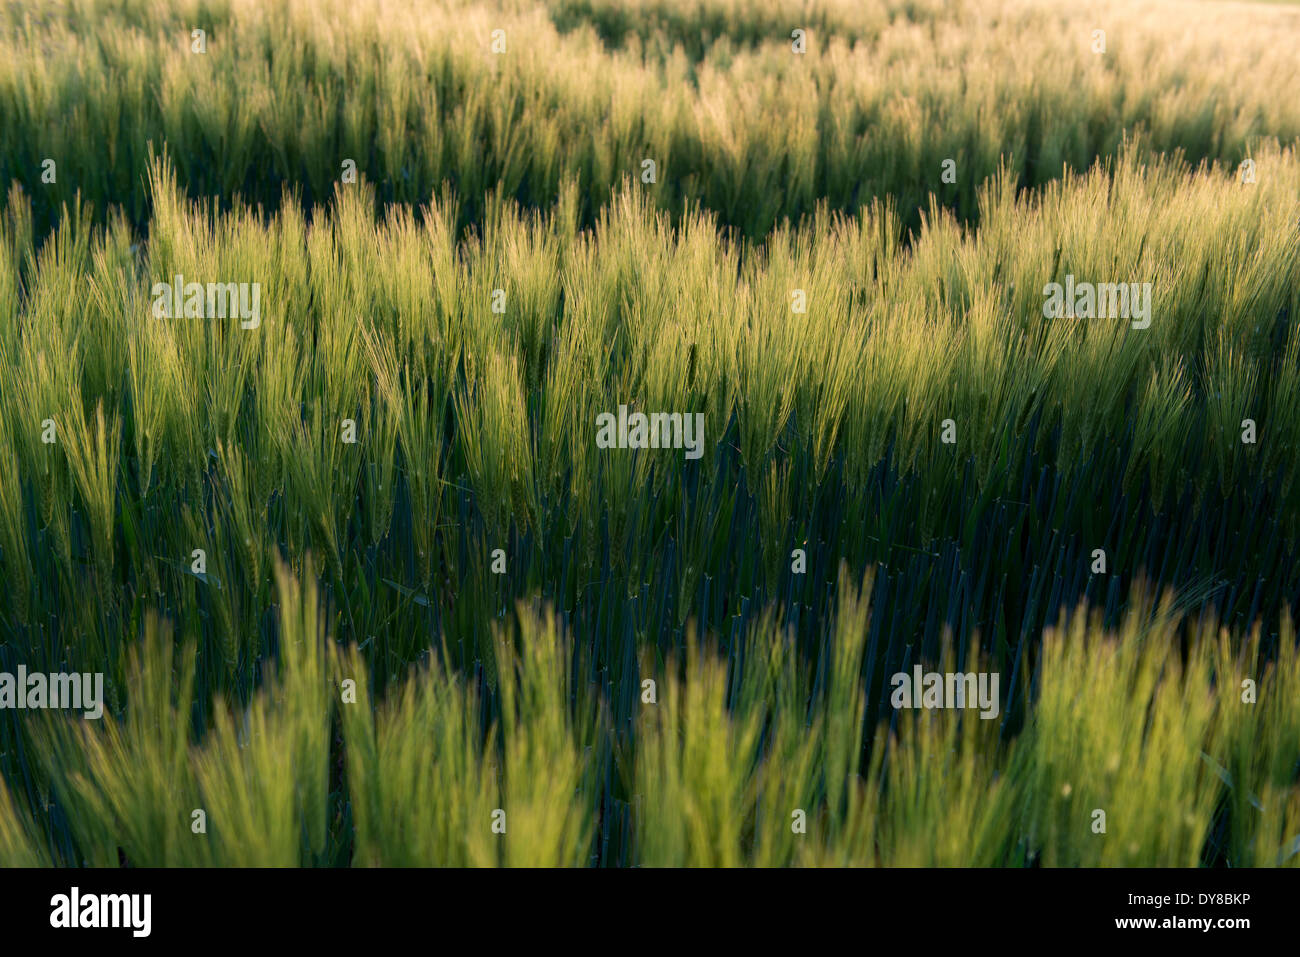 Evening, fruit, grain field, light, shade, husks, structure, wheat, wheat field, ear, agriculture Stock Photo